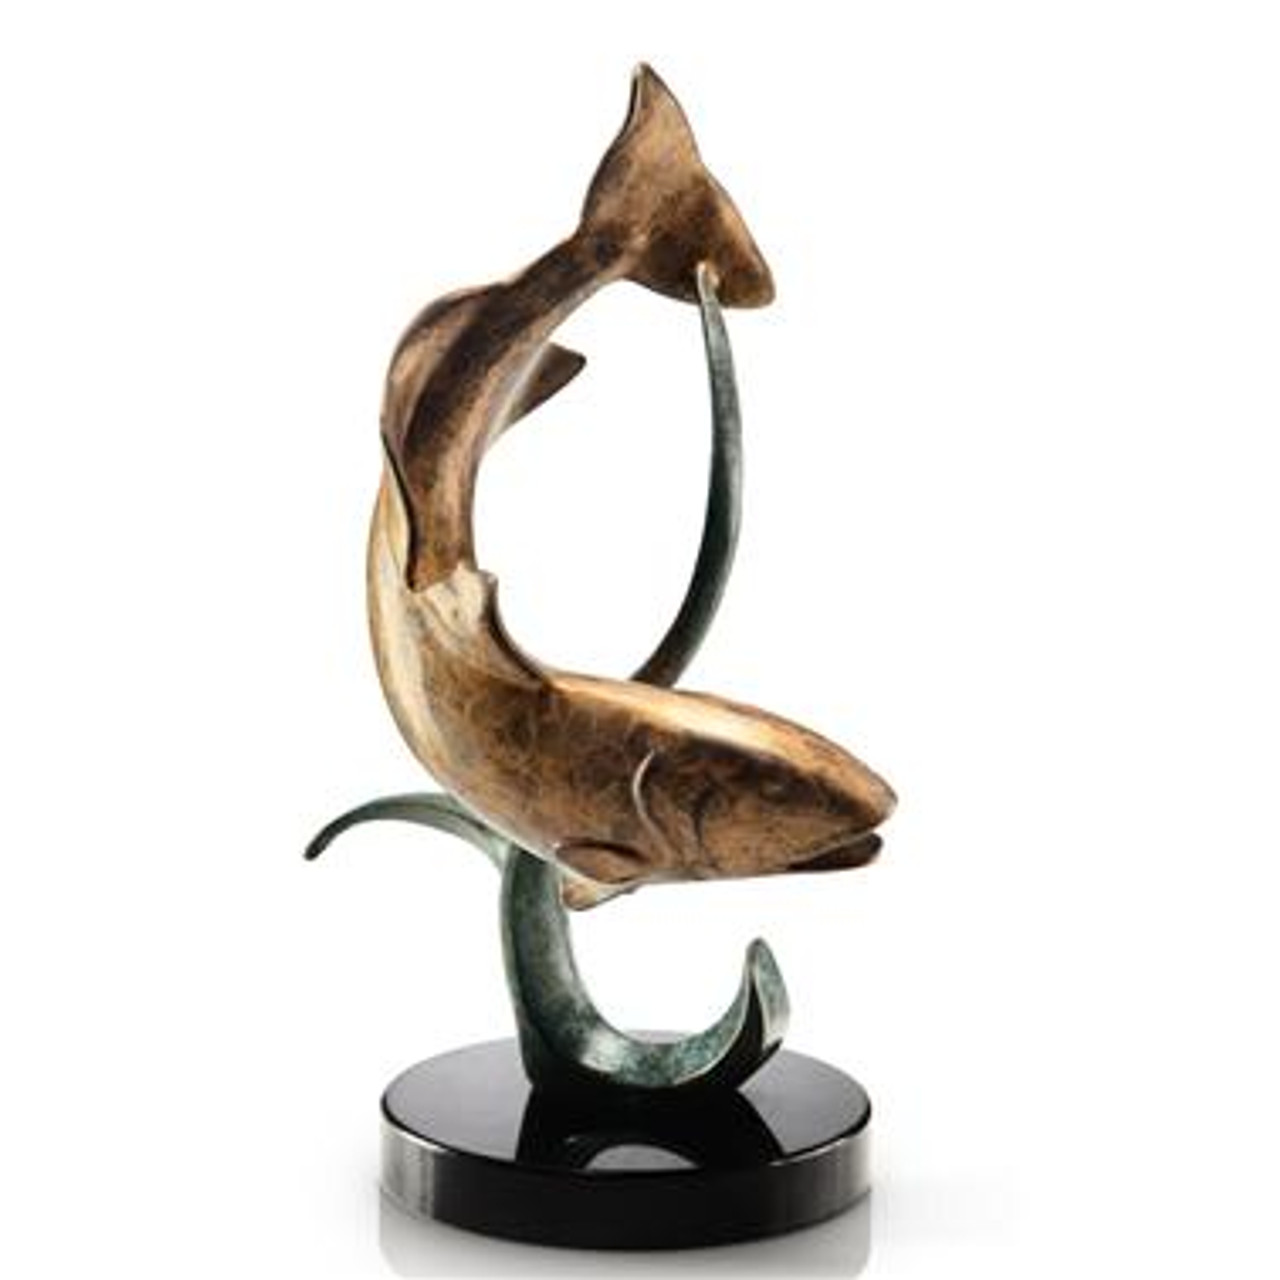 Shallow Water Fighter Sculpture - Everything Nautical, Inc.